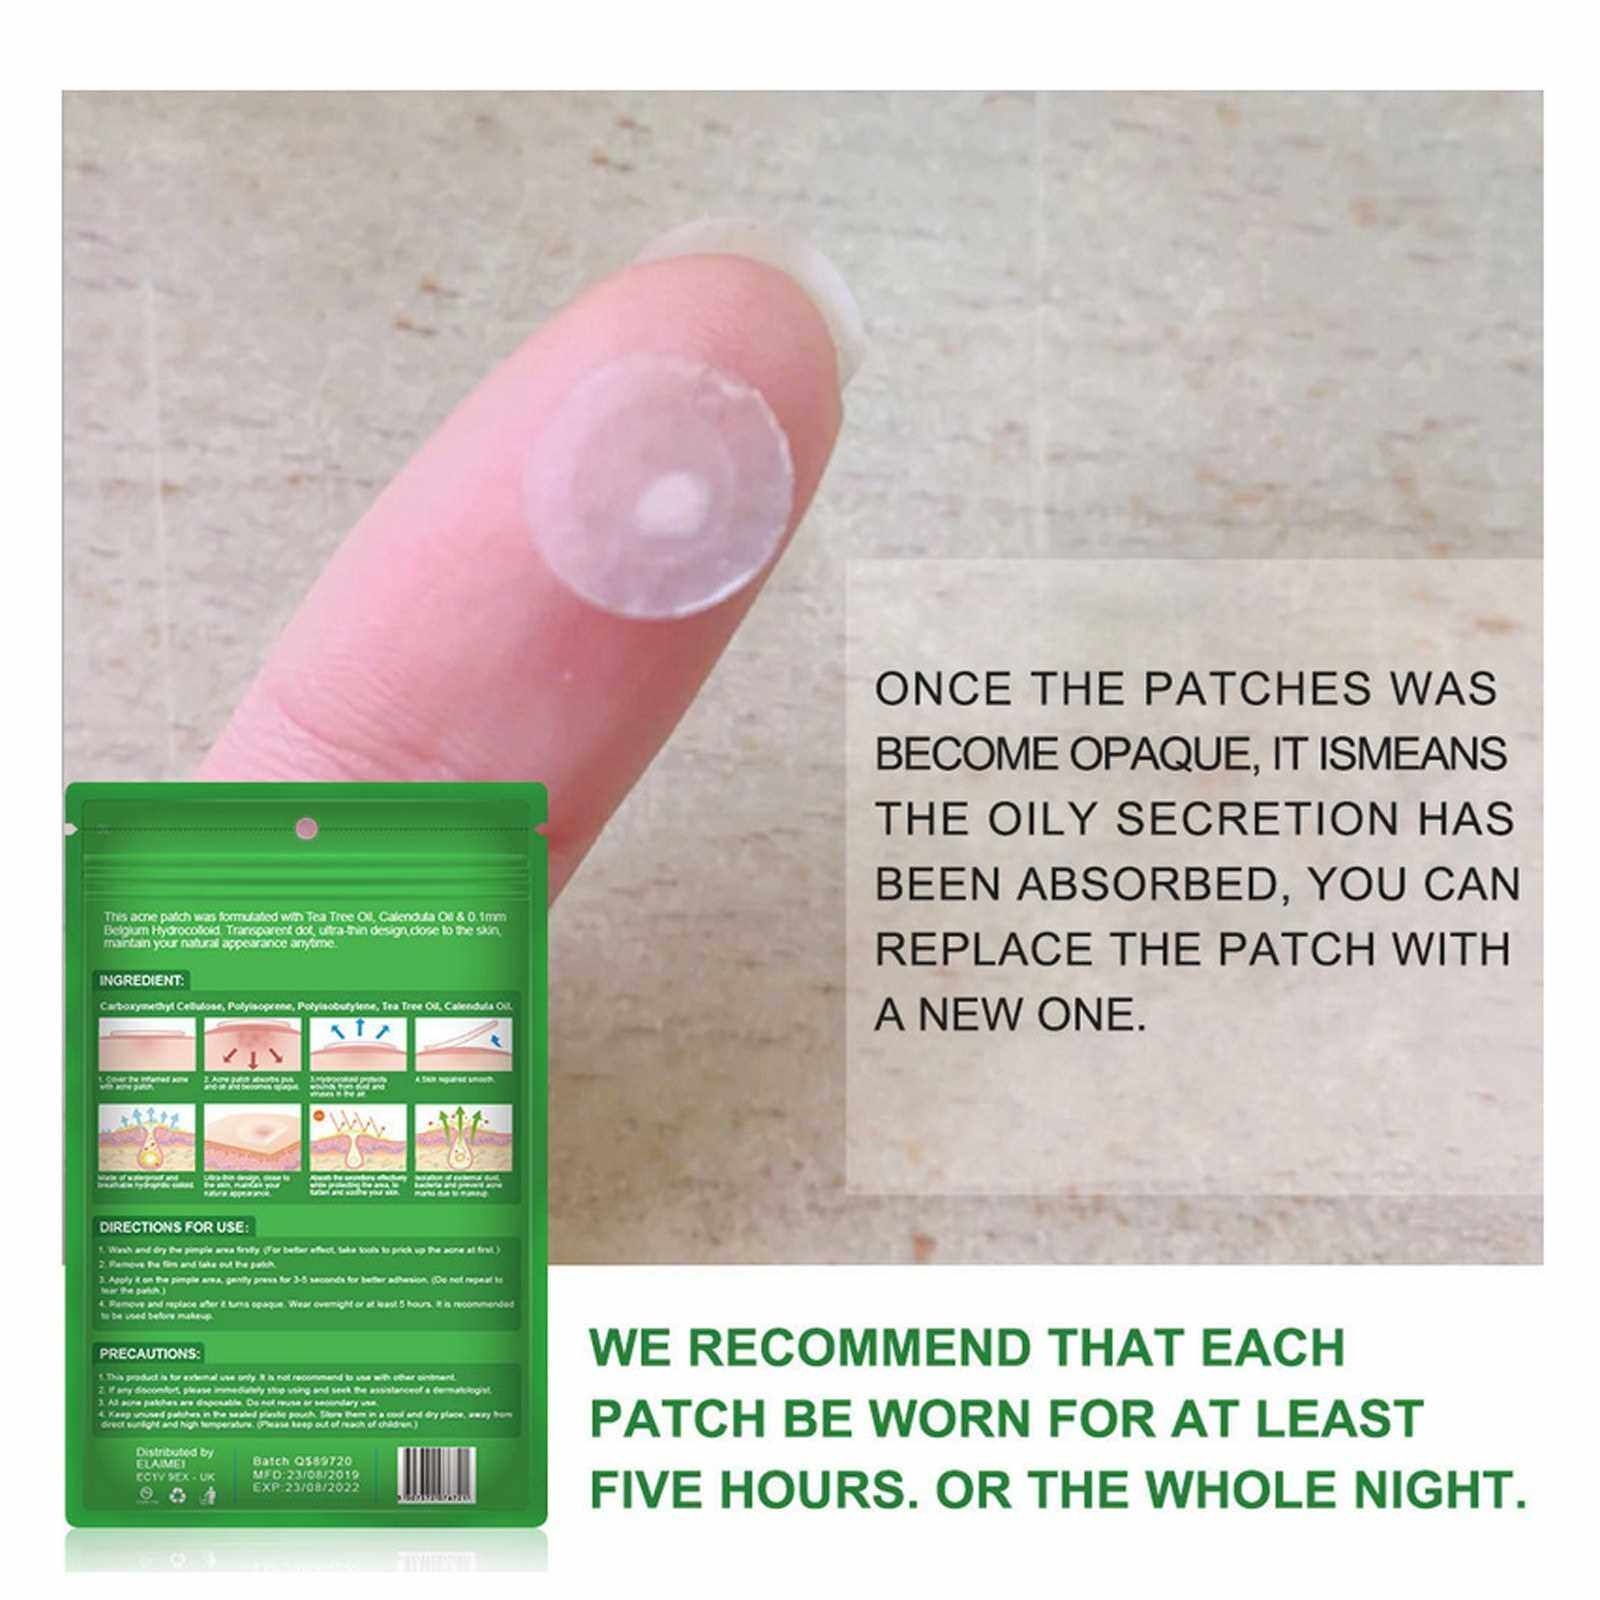 BEST SELLER 24 Patches Acne Pimple Patch Invisible Acne Removal Stickers Pimple Remover Tool Face Skin Care for Day Night Use (Green)